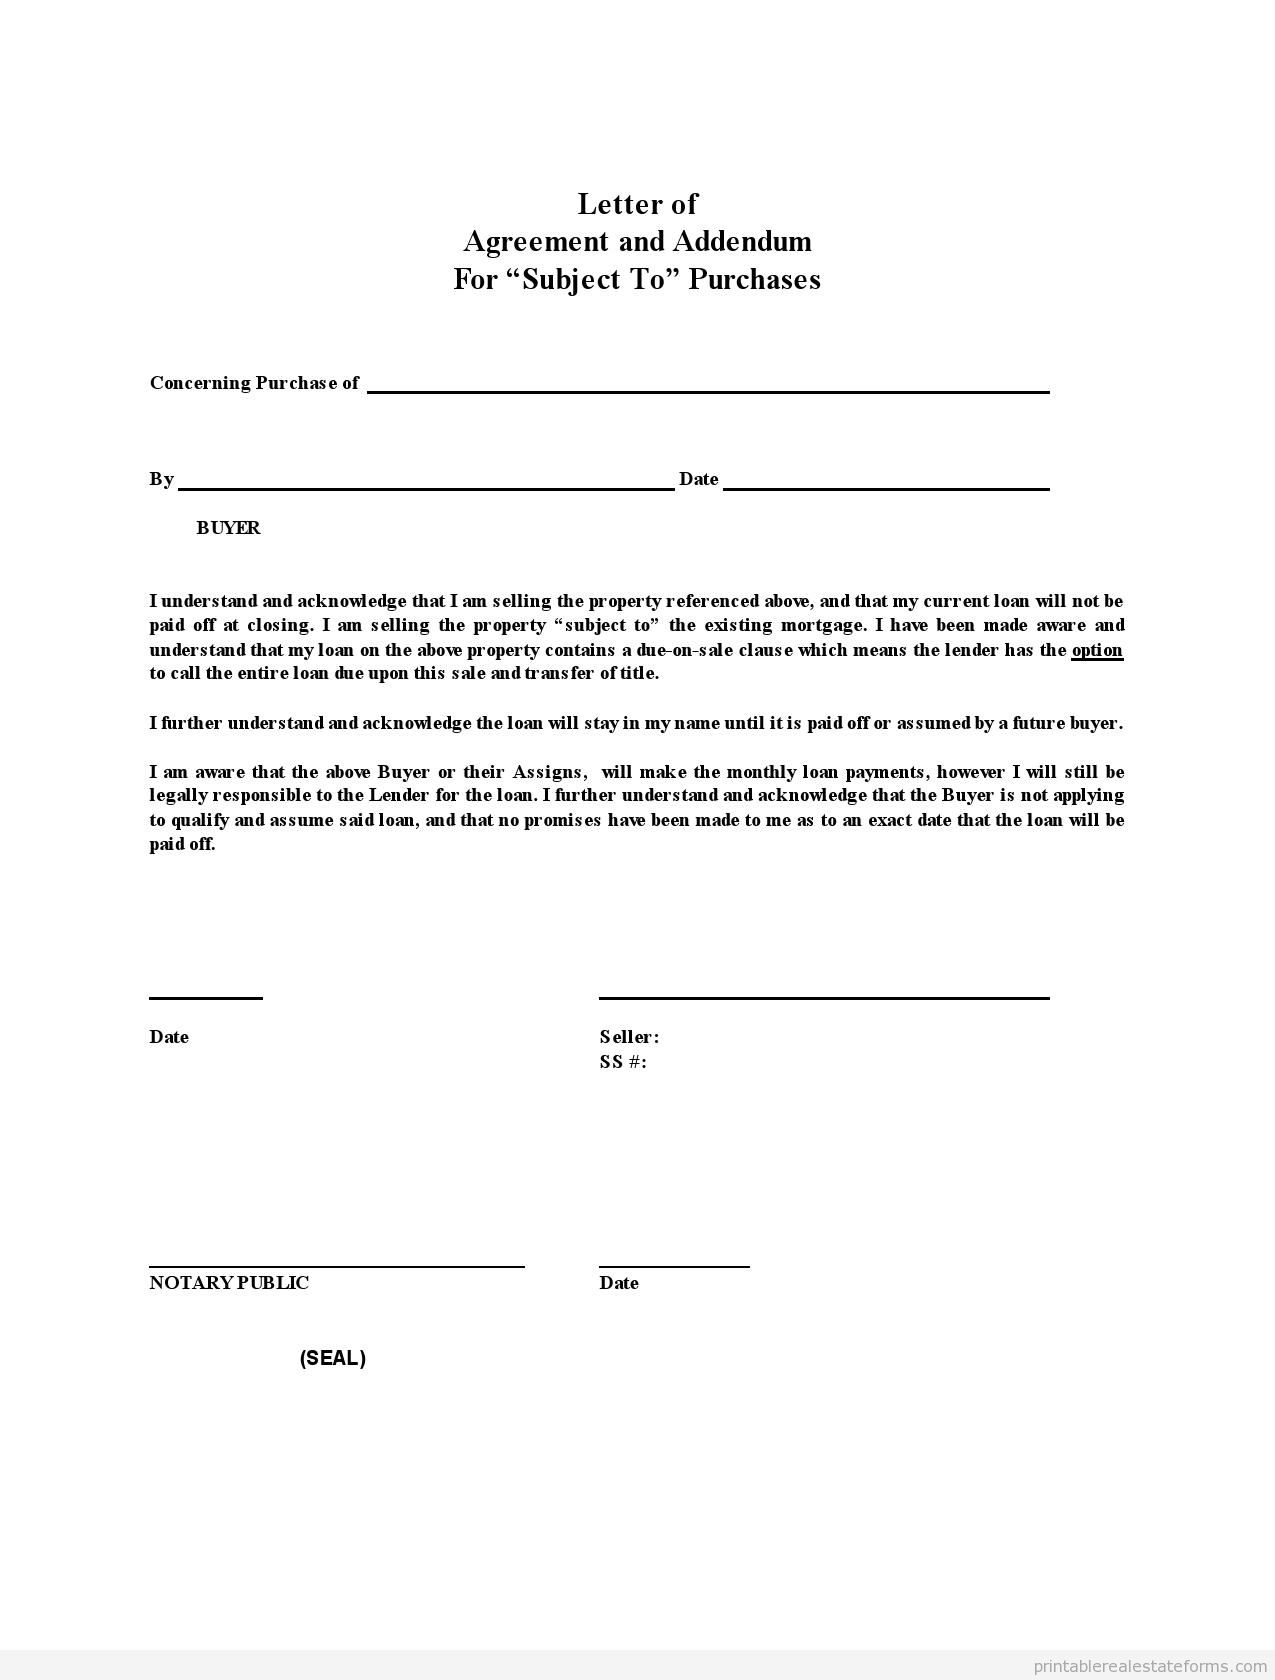 Vehicle offer and sale agreement form